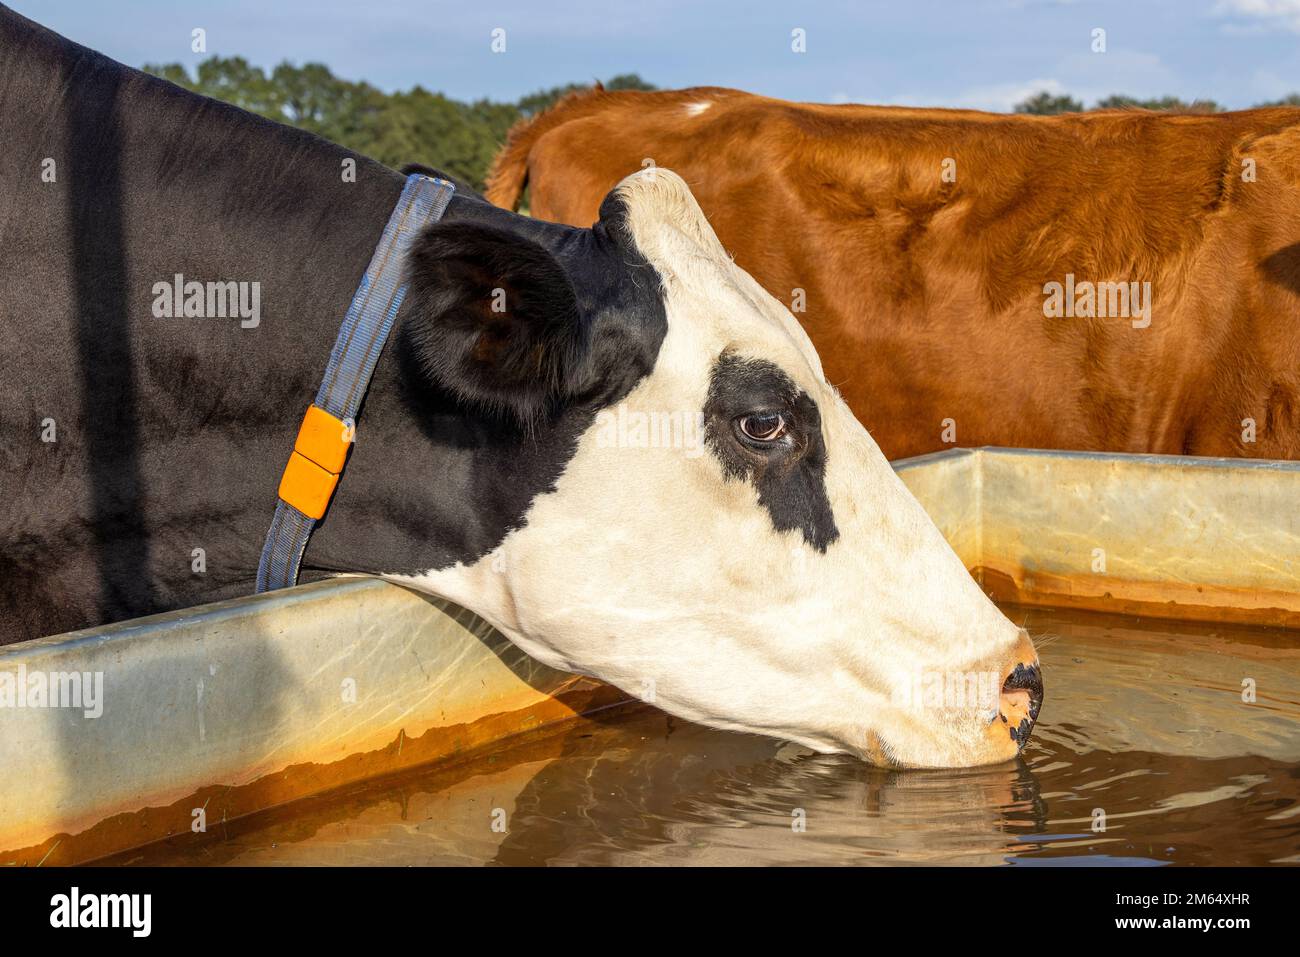 Cow drinking from a water container, black and white standing head into a large trough waterrimple in a green pasture, Stock Photo